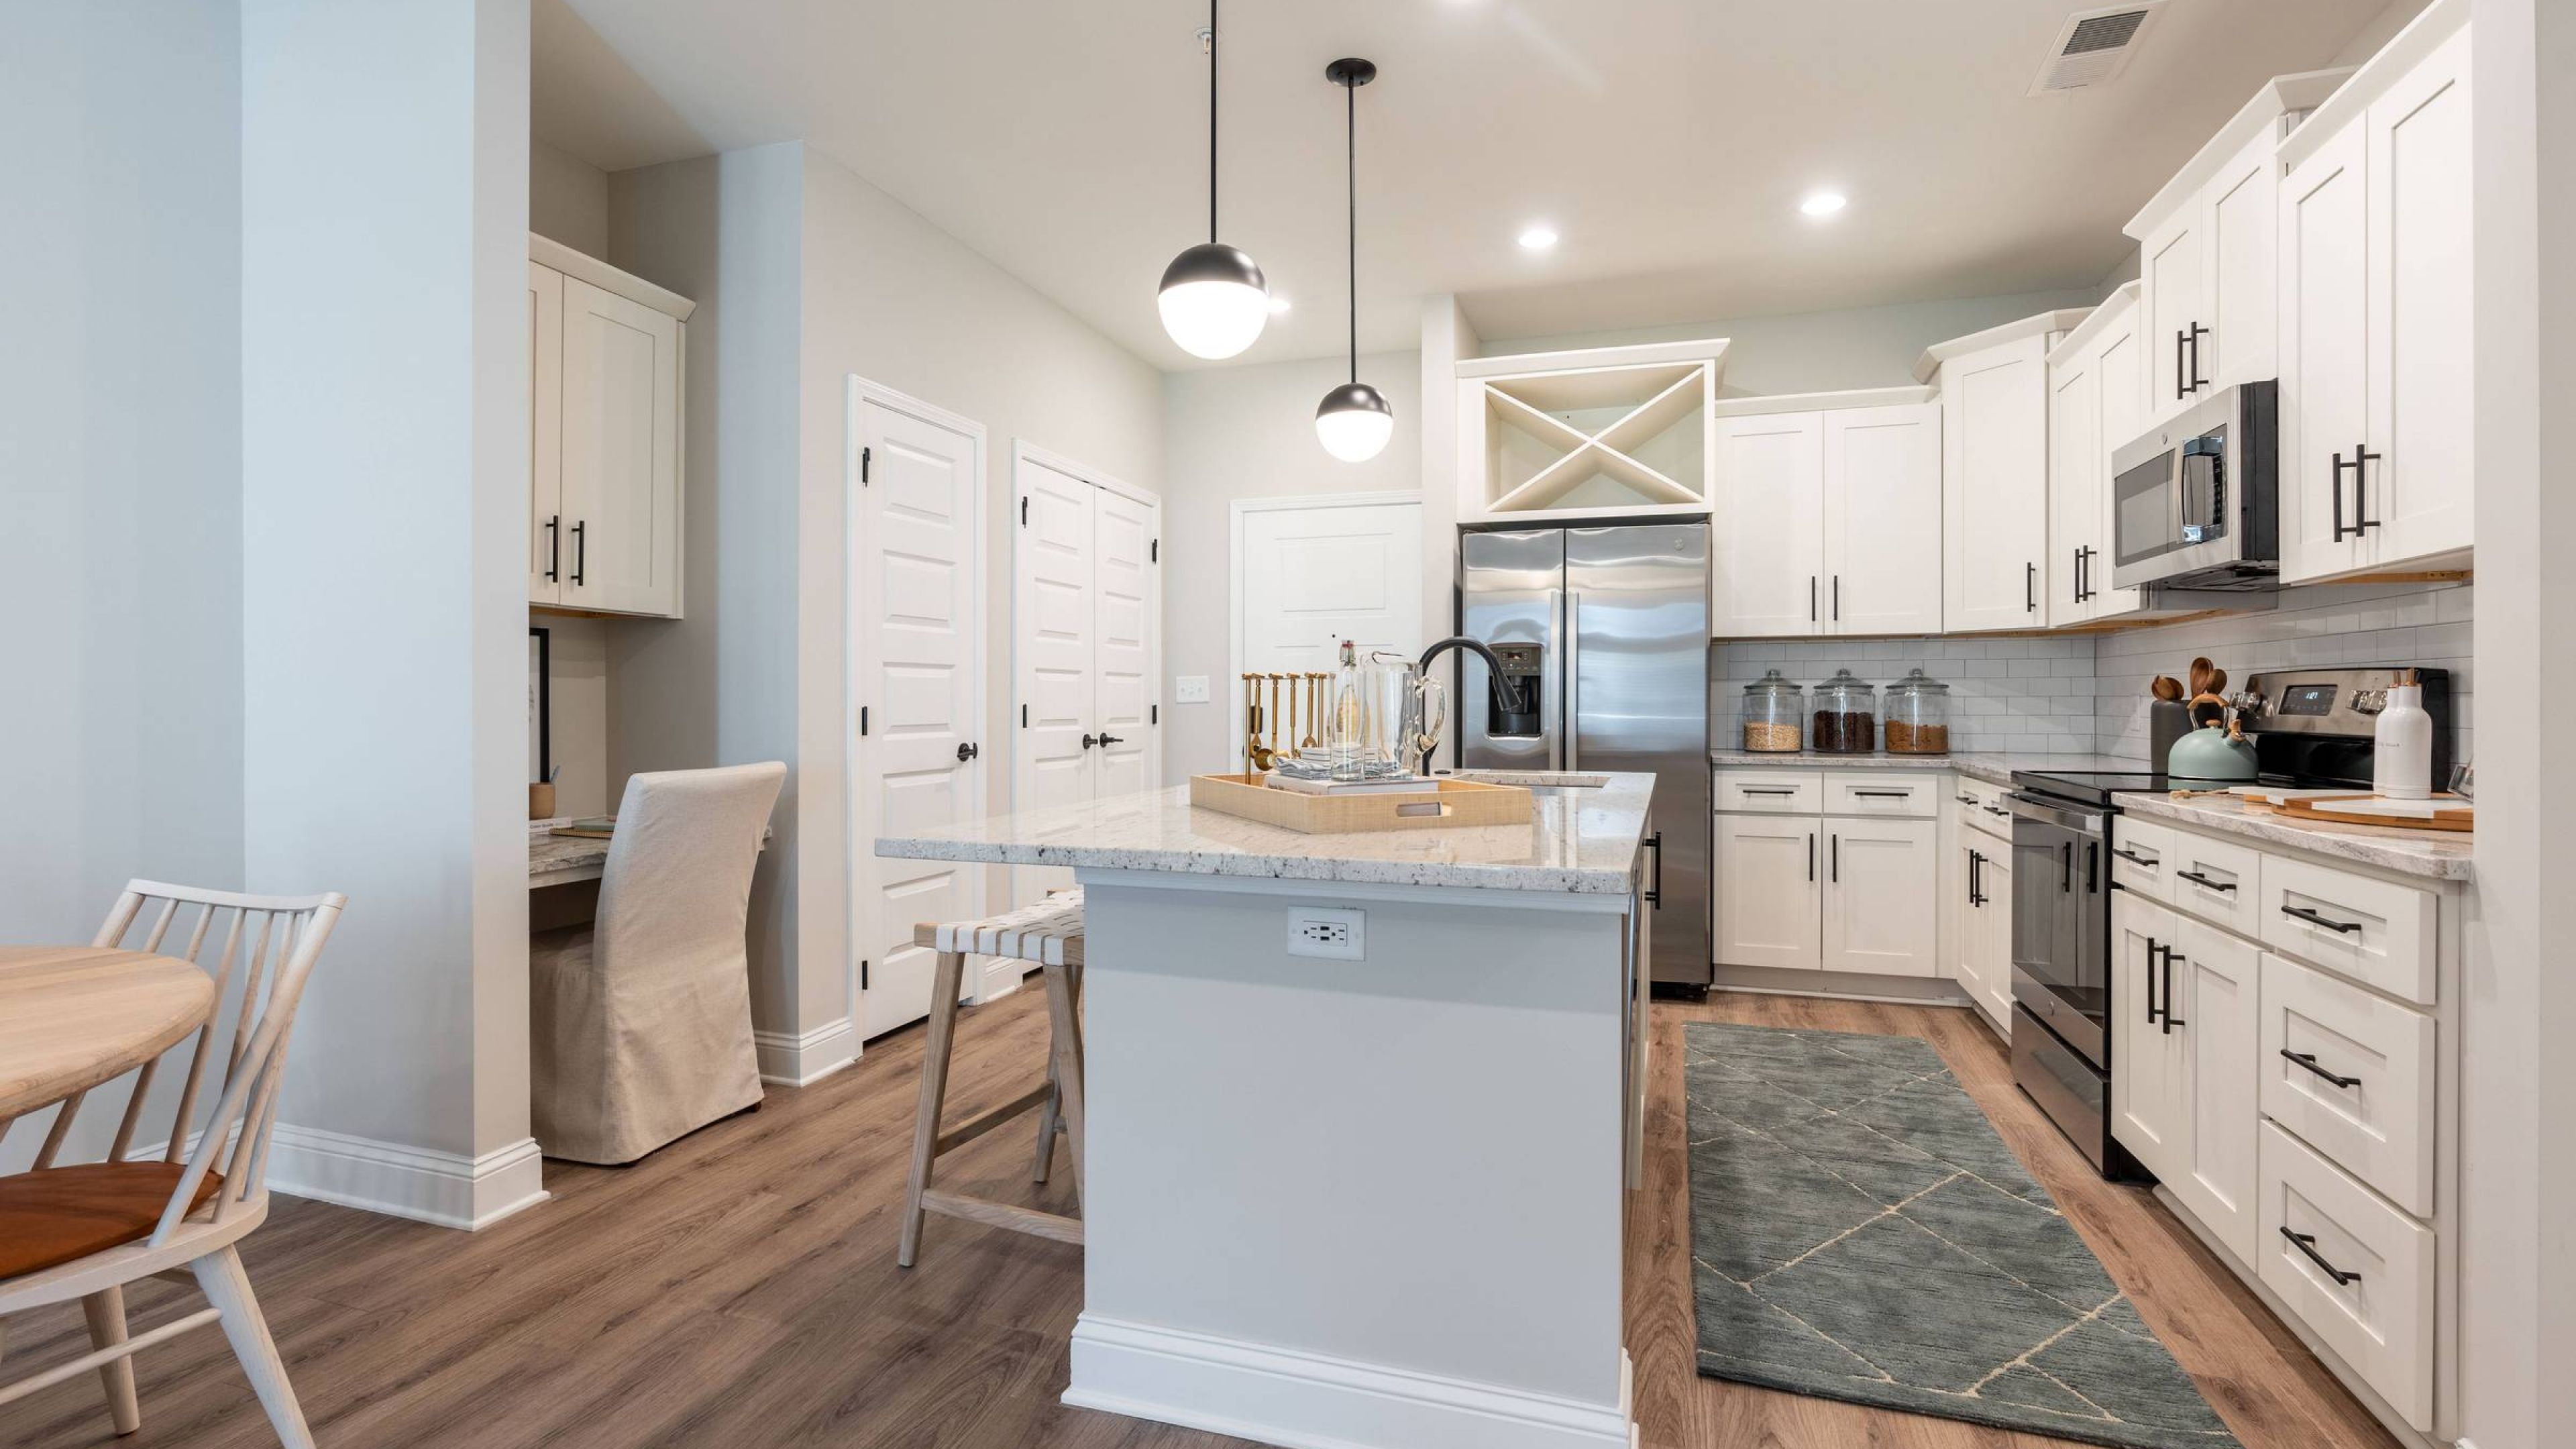 Hawthorne at Summerville apartment kitchen and living area with quartz countertops, stainless steel appliances, and ample cabinet storage